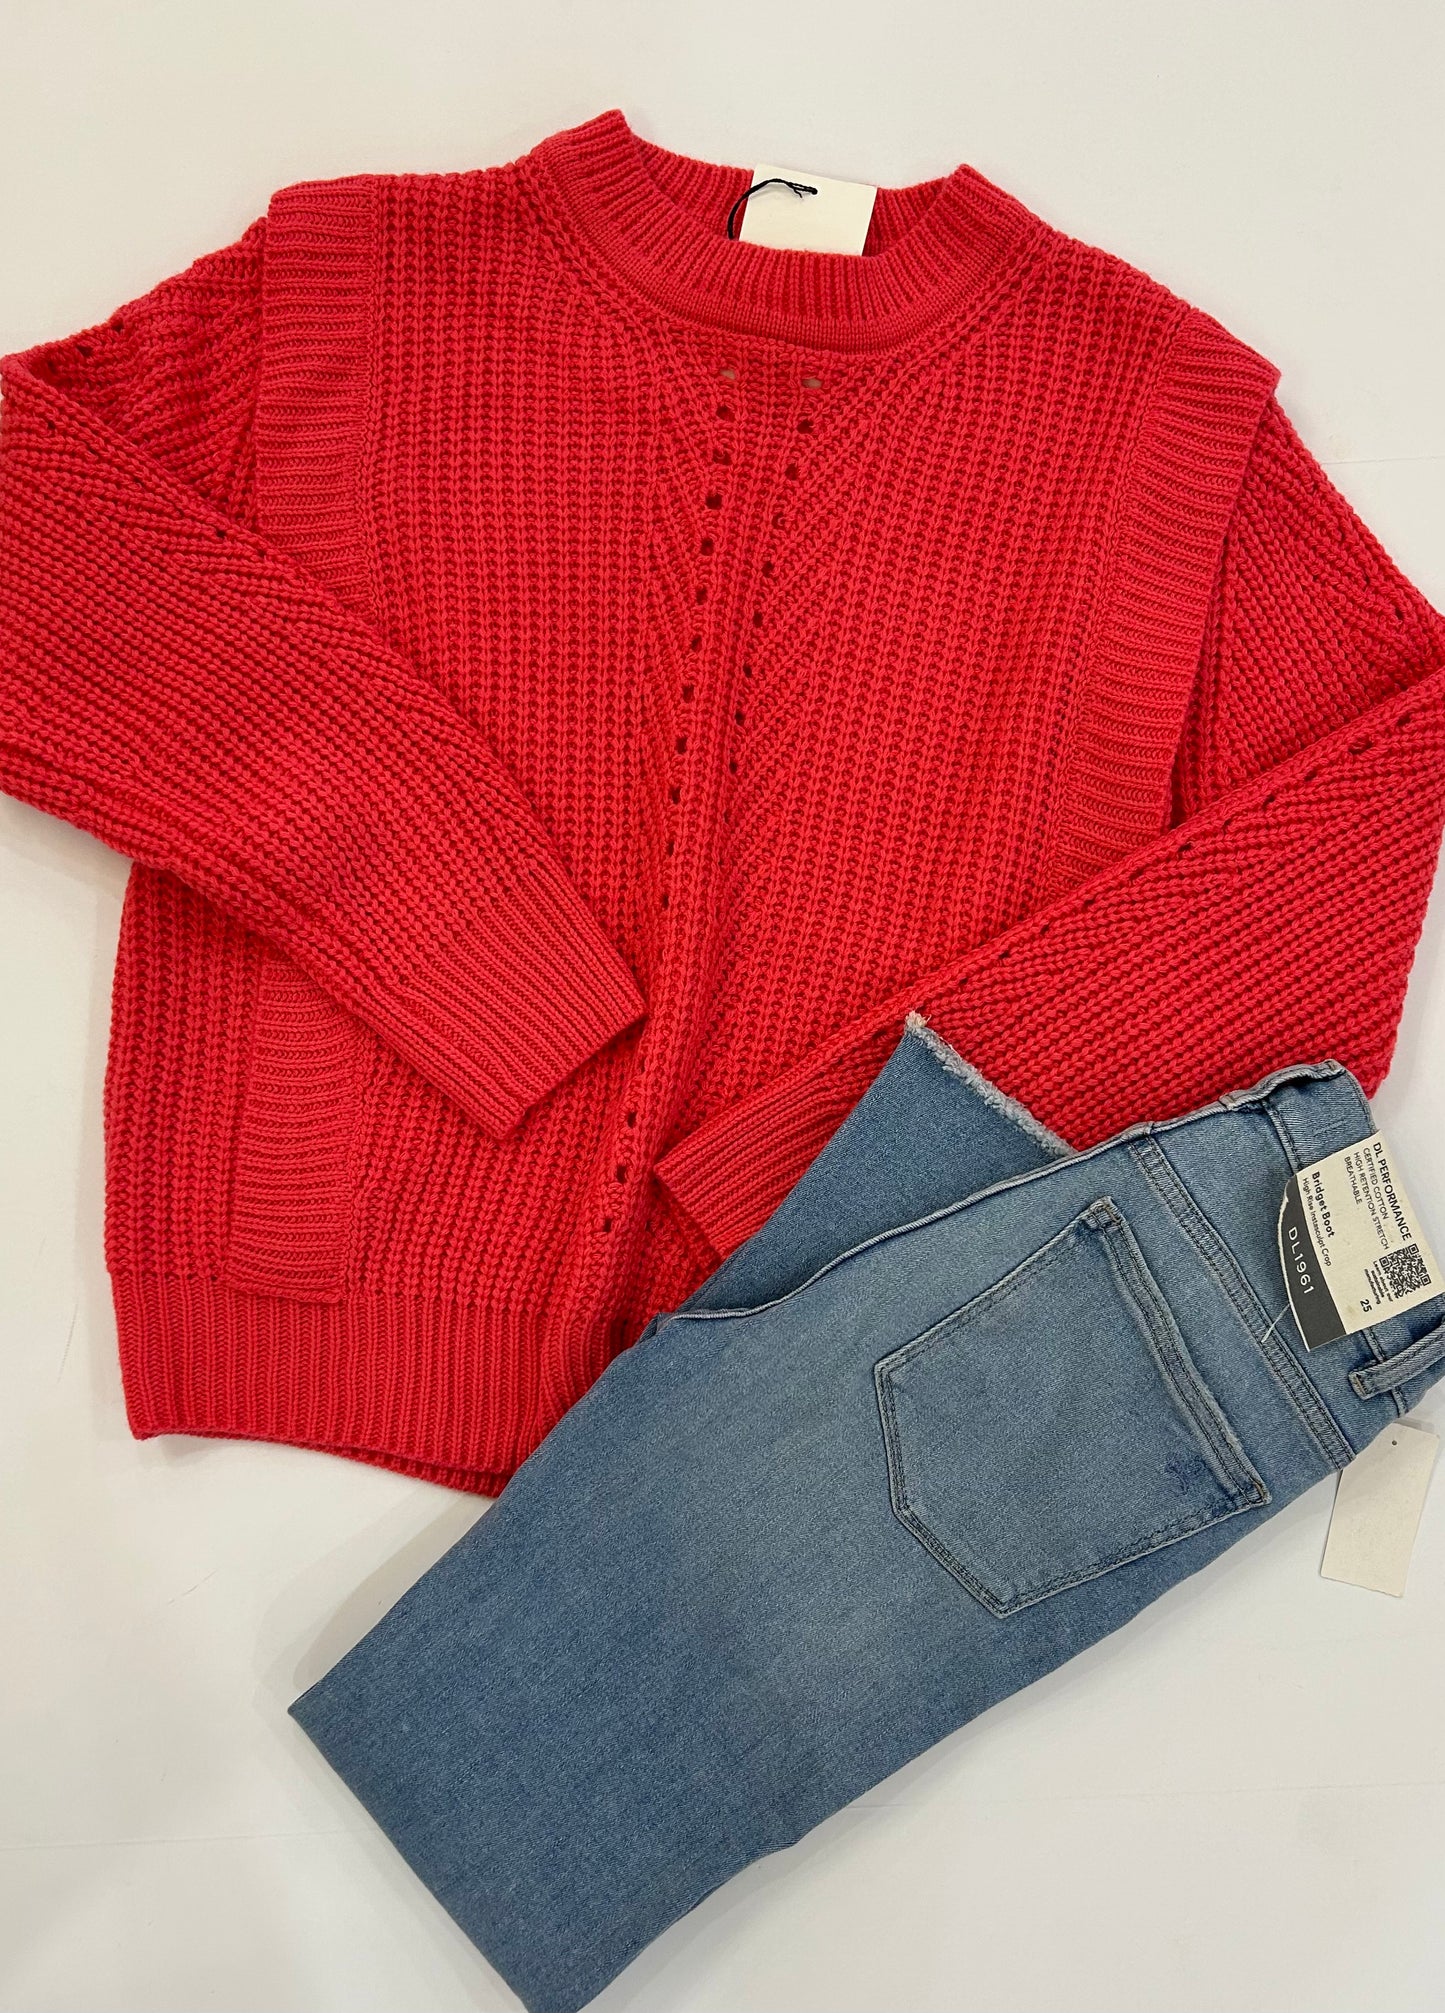 Teaberry Sweater